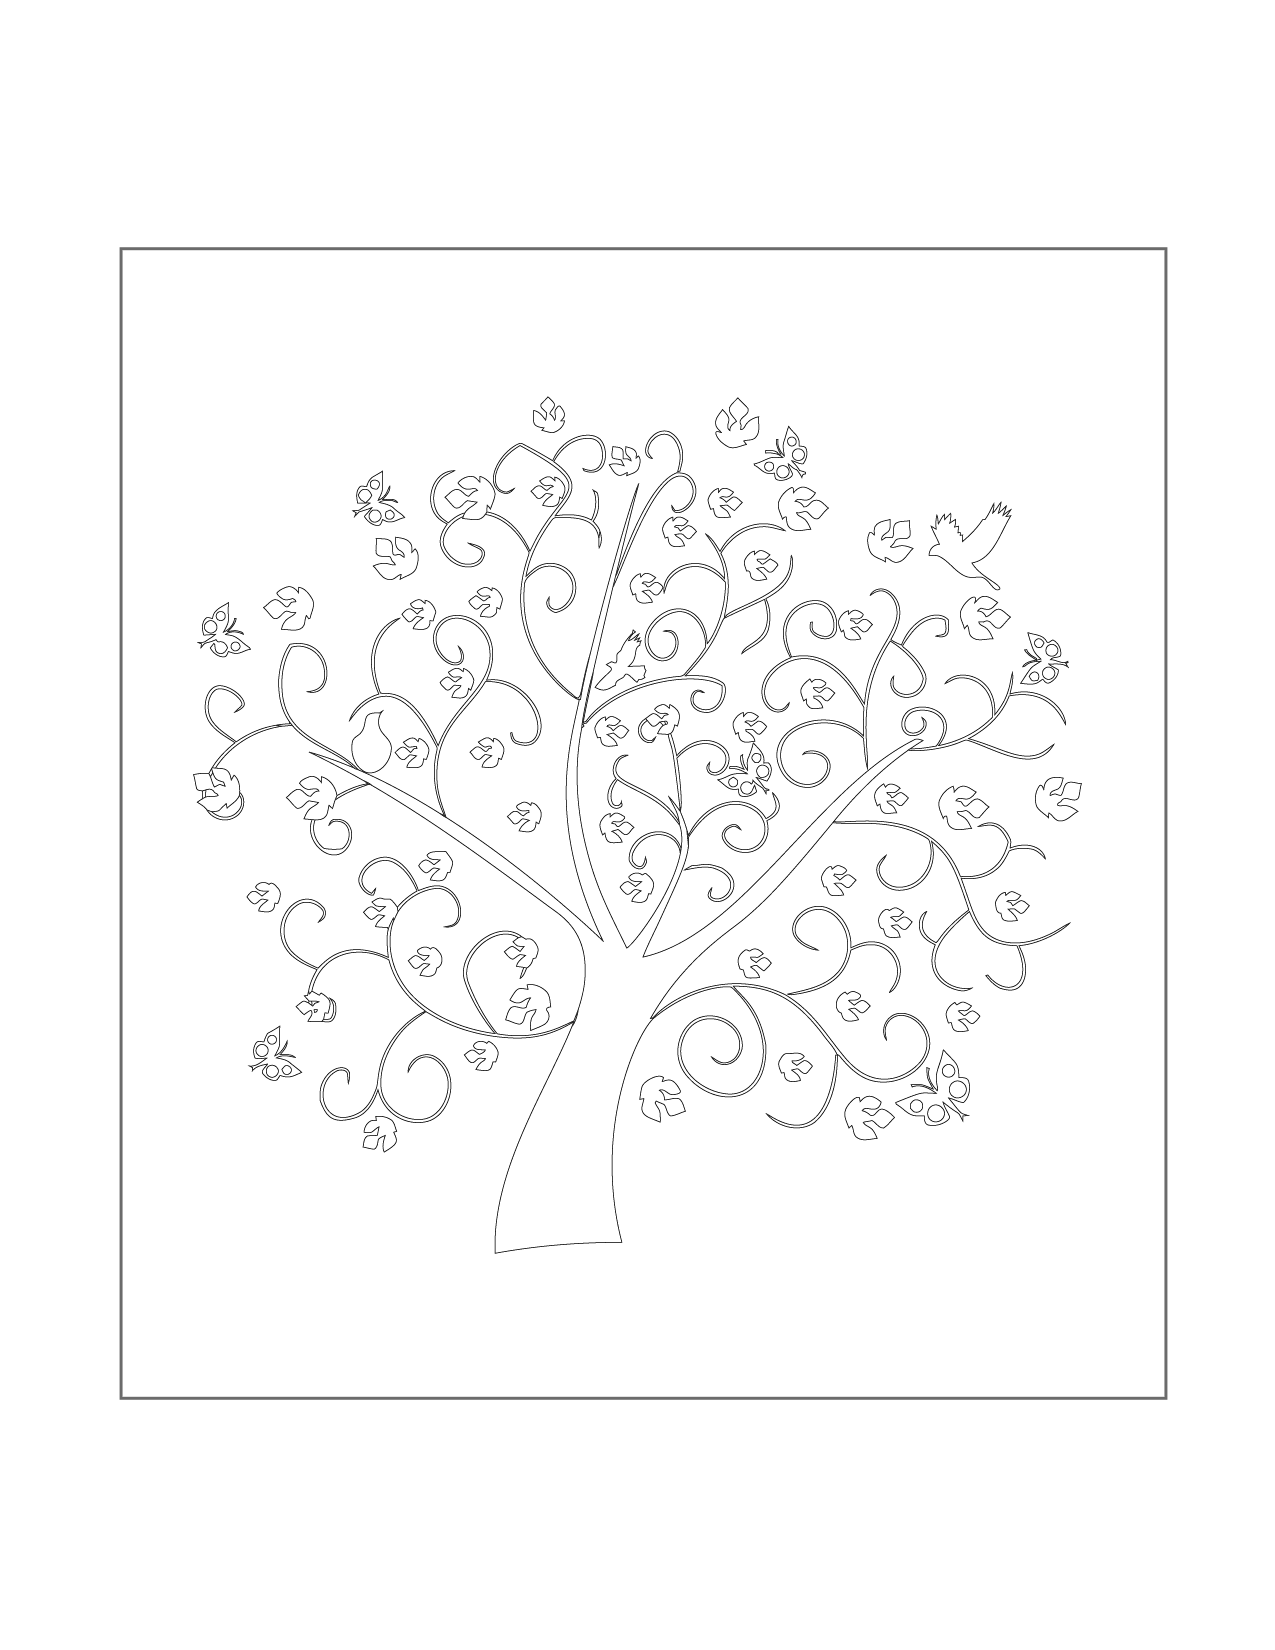 Tree With Butterflies Coloring Page